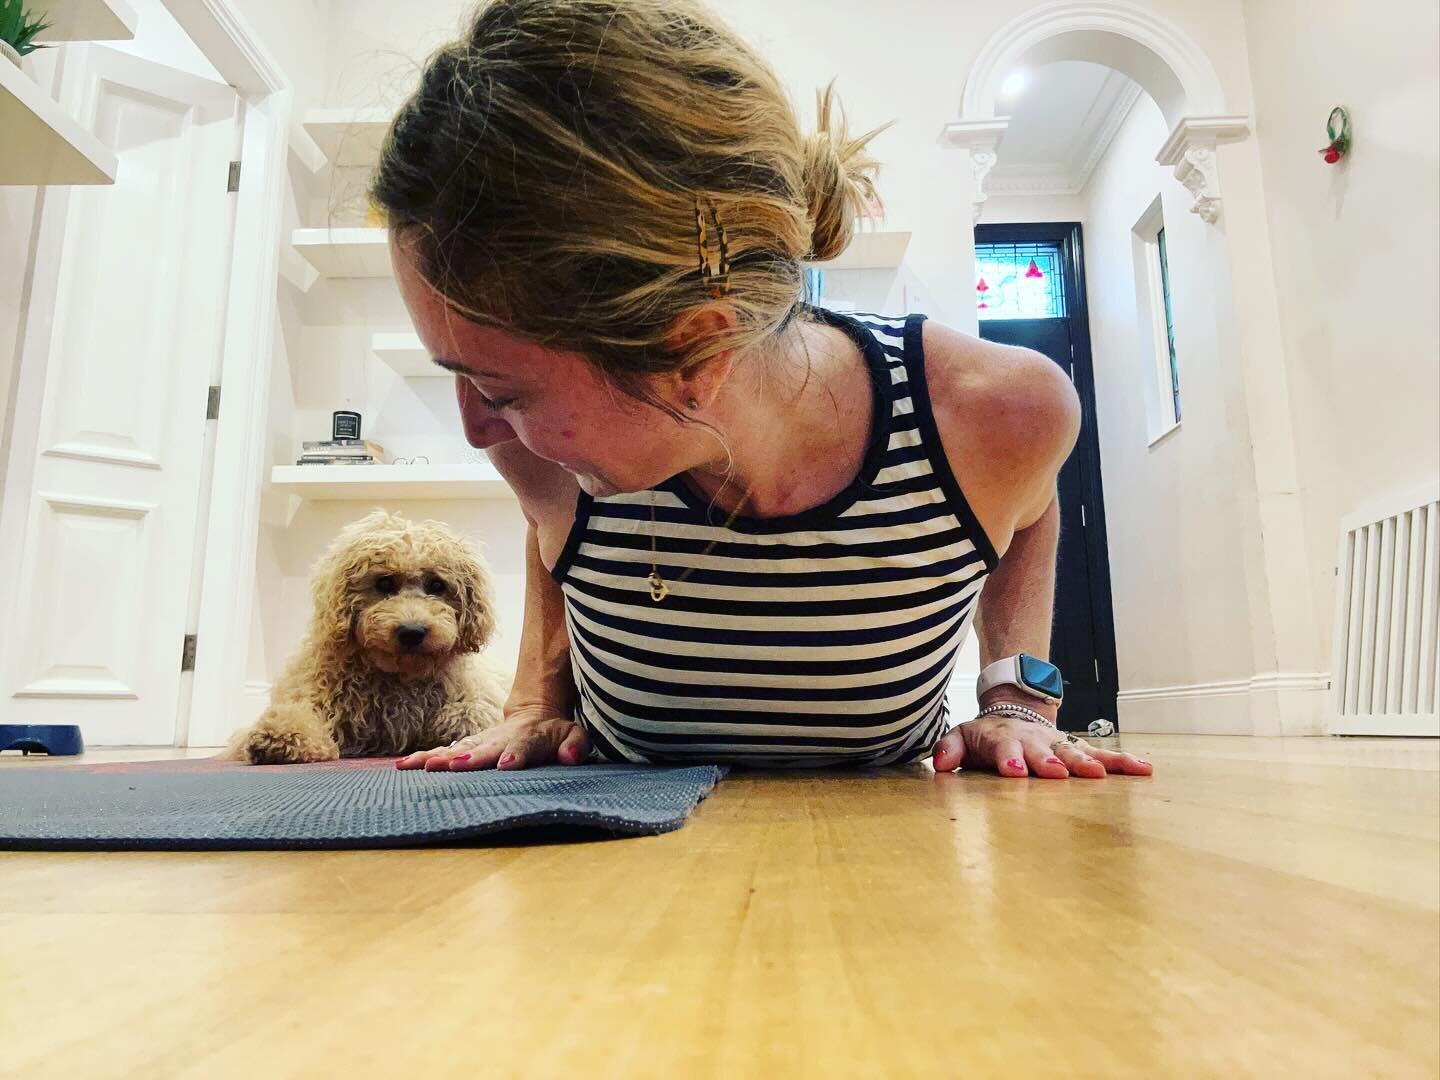 My personal trainer takes his coaching role seriously 😂

He also has a very unfair advantage on downward dog. 🖤